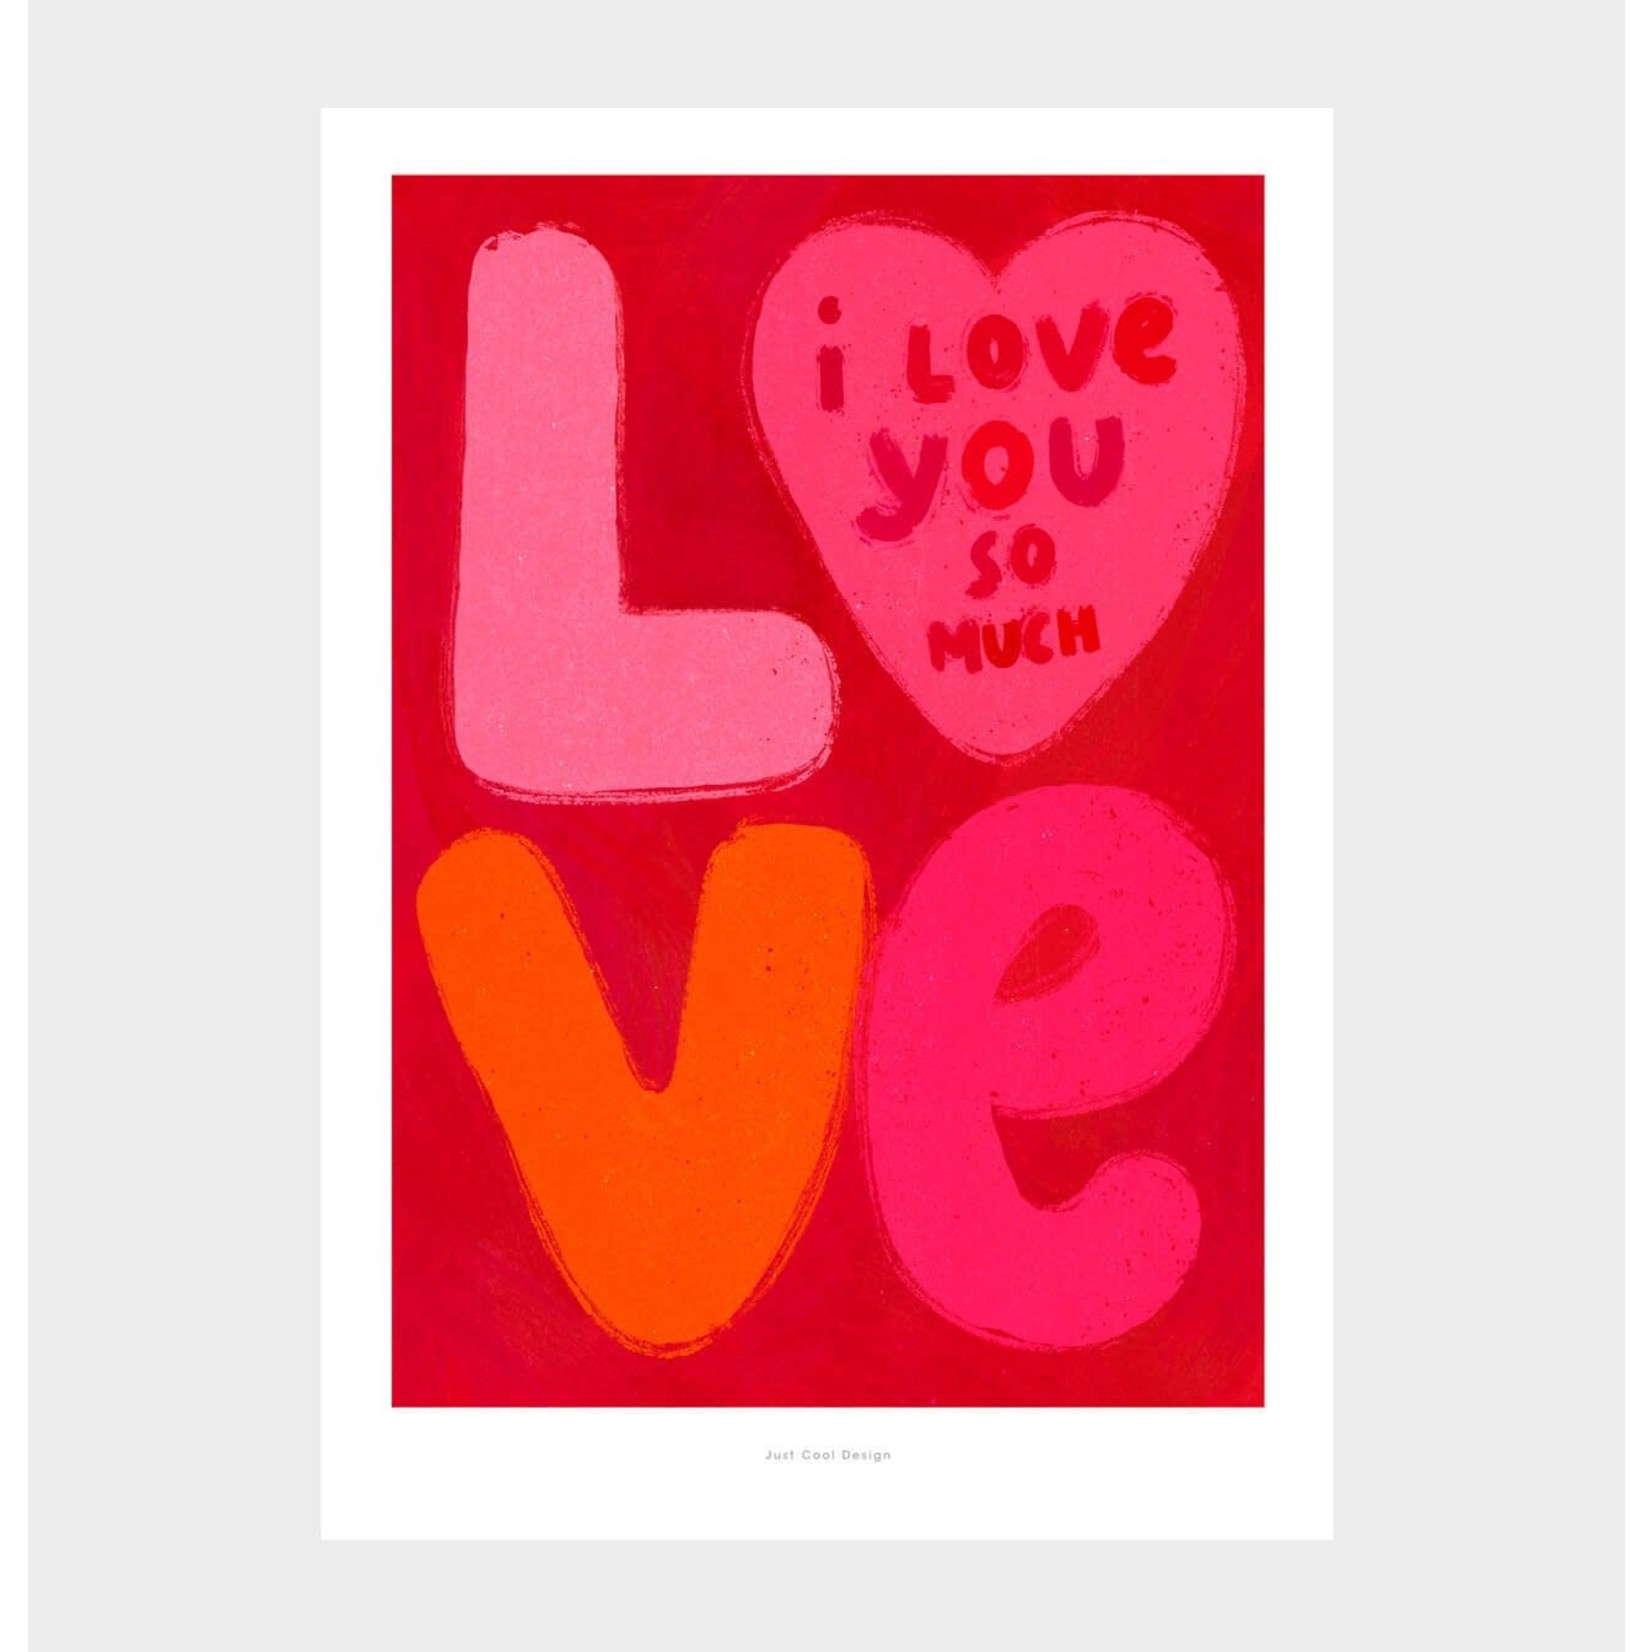 Just Cool Design I love you so much | Illustration art print poster